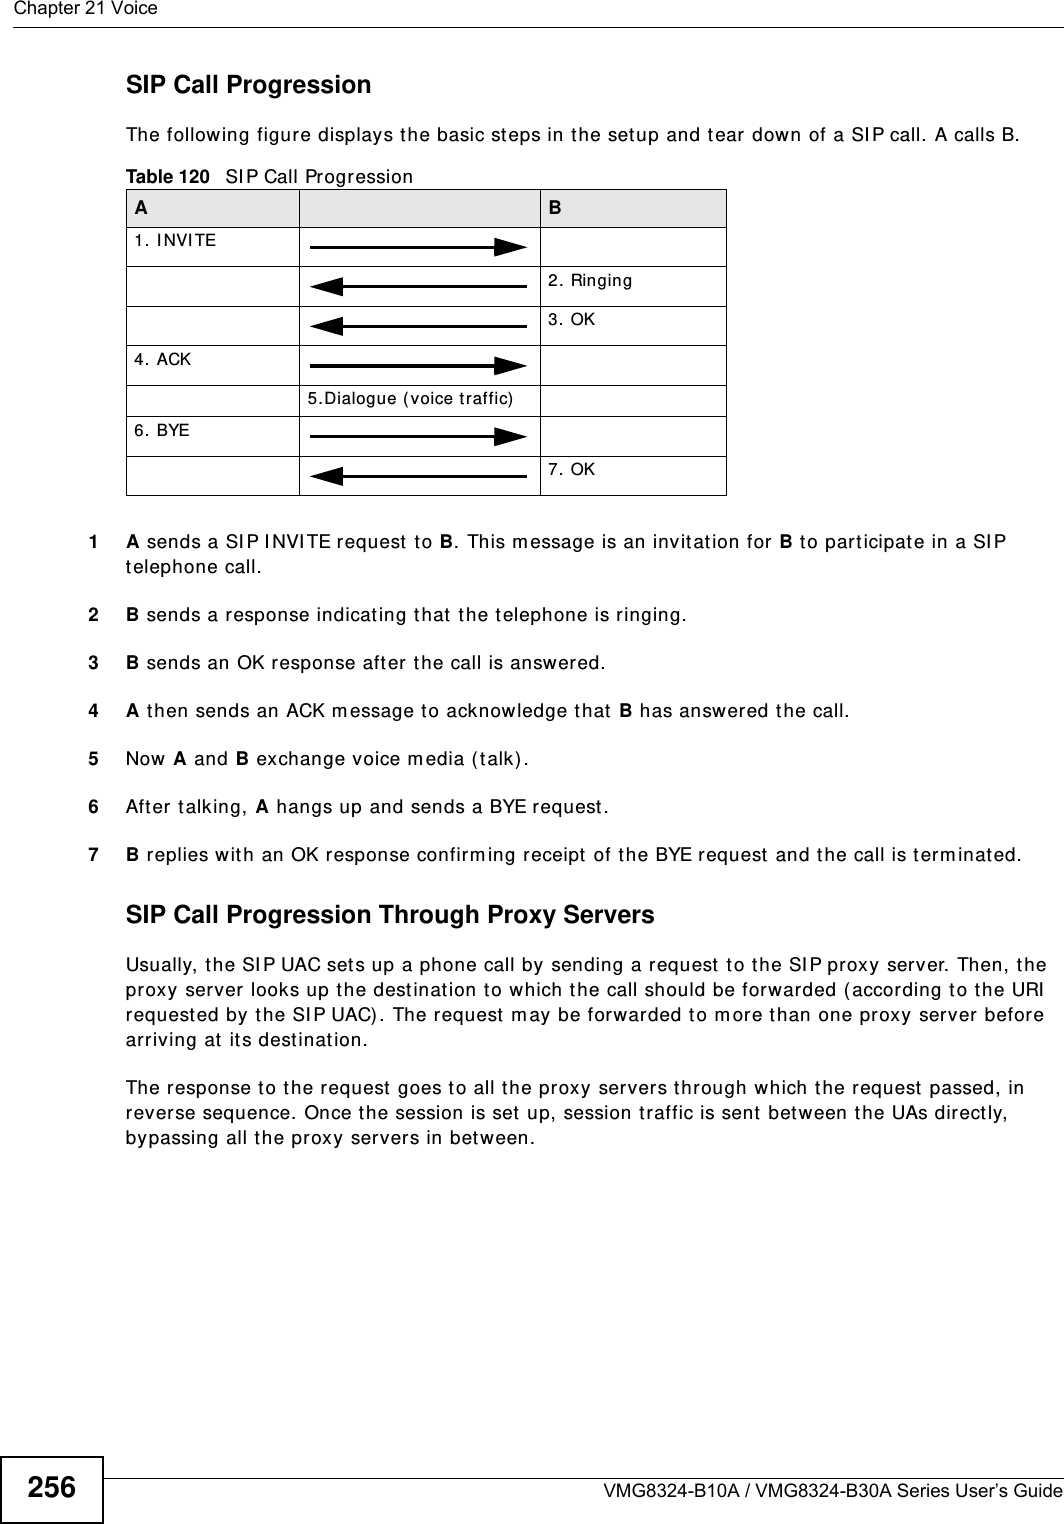 Chapter 21 VoiceVMG8324-B10A / VMG8324-B30A Series User’s Guide256SIP Call ProgressionThe following figure displays t he basic st eps in t he setup and tear down of a SI P call. A calls B. 1 A sends a SI P I NVI TE request  to B. This m essage is an invit ation for B to par t icipat e in a SI P telephone call. 2 B sends a response indicating that  t he telephone is ringing.3 B sends an OK response aft er t he call is answered. 4 A then sends an ACK m essage t o acknow ledge that B has answered t he call. 5Now A and B exchange voice m edia (t alk). 6After talking, A hangs up and sends a BYE request . 7 B replies wit h an OK response confirm ing receipt  of t he BYE request  and the call is t erm inat ed.SIP Call Progression Through Proxy ServersUsually, the SI P UAC sets up a phone call by sending a request  t o t he SI P proxy server. Then, the proxy server looks up t he dest ination to which t he call should be forwarded ( according t o t he URI  request ed by the SI P UAC). The request  m ay be forwarded t o m ore than one proxy server before arriving at its dest ination. The response t o the request goes t o all the proxy servers t hrough which t he request  passed, in rever se sequence. Once t he session is set  up, session traffic is sent between t he UAs directly, bypassing all t he proxy servers in bet ween.Table 120   SI P Call ProgressionA B1. I NVI TE2. Ringing3. OK4. ACK 5.Dialogue (voice t raffic)6. BYE7. OK